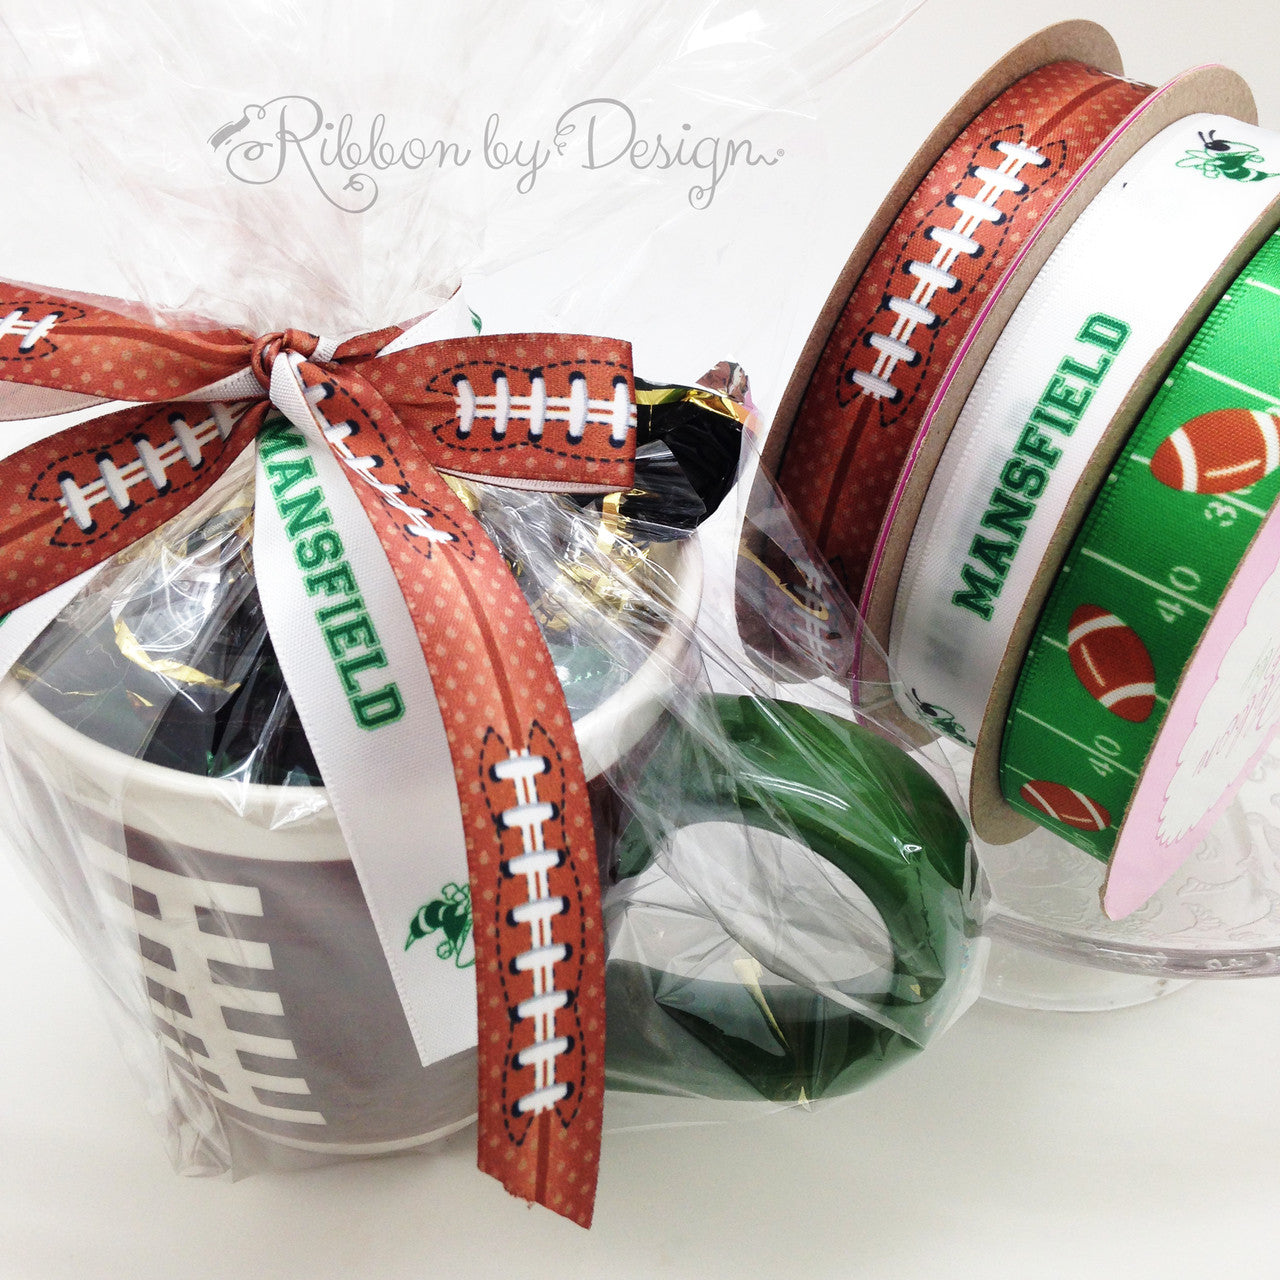 We can turn your high school football banquet into a memorable event with custom ribbon paired with our football themed ribbons!